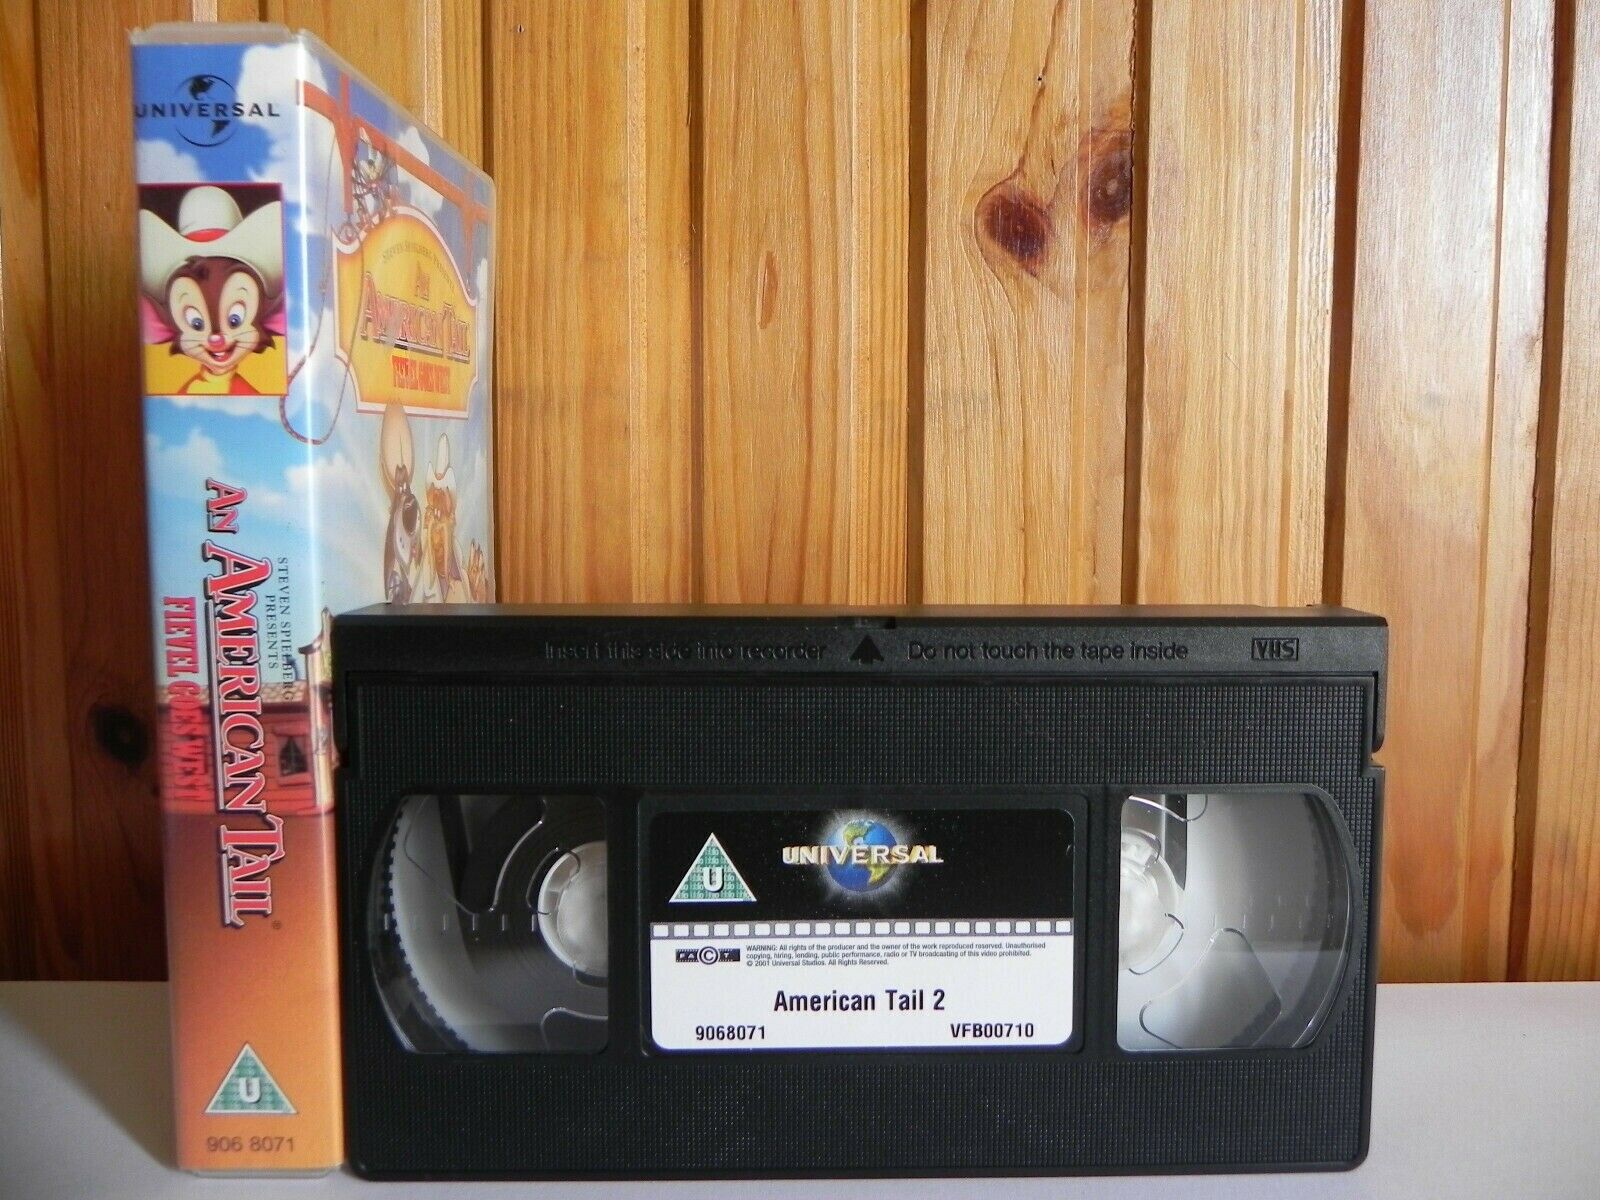 An American Tail: Fievel Goes West - Universal - Adventure - Animated - Pal VHS-